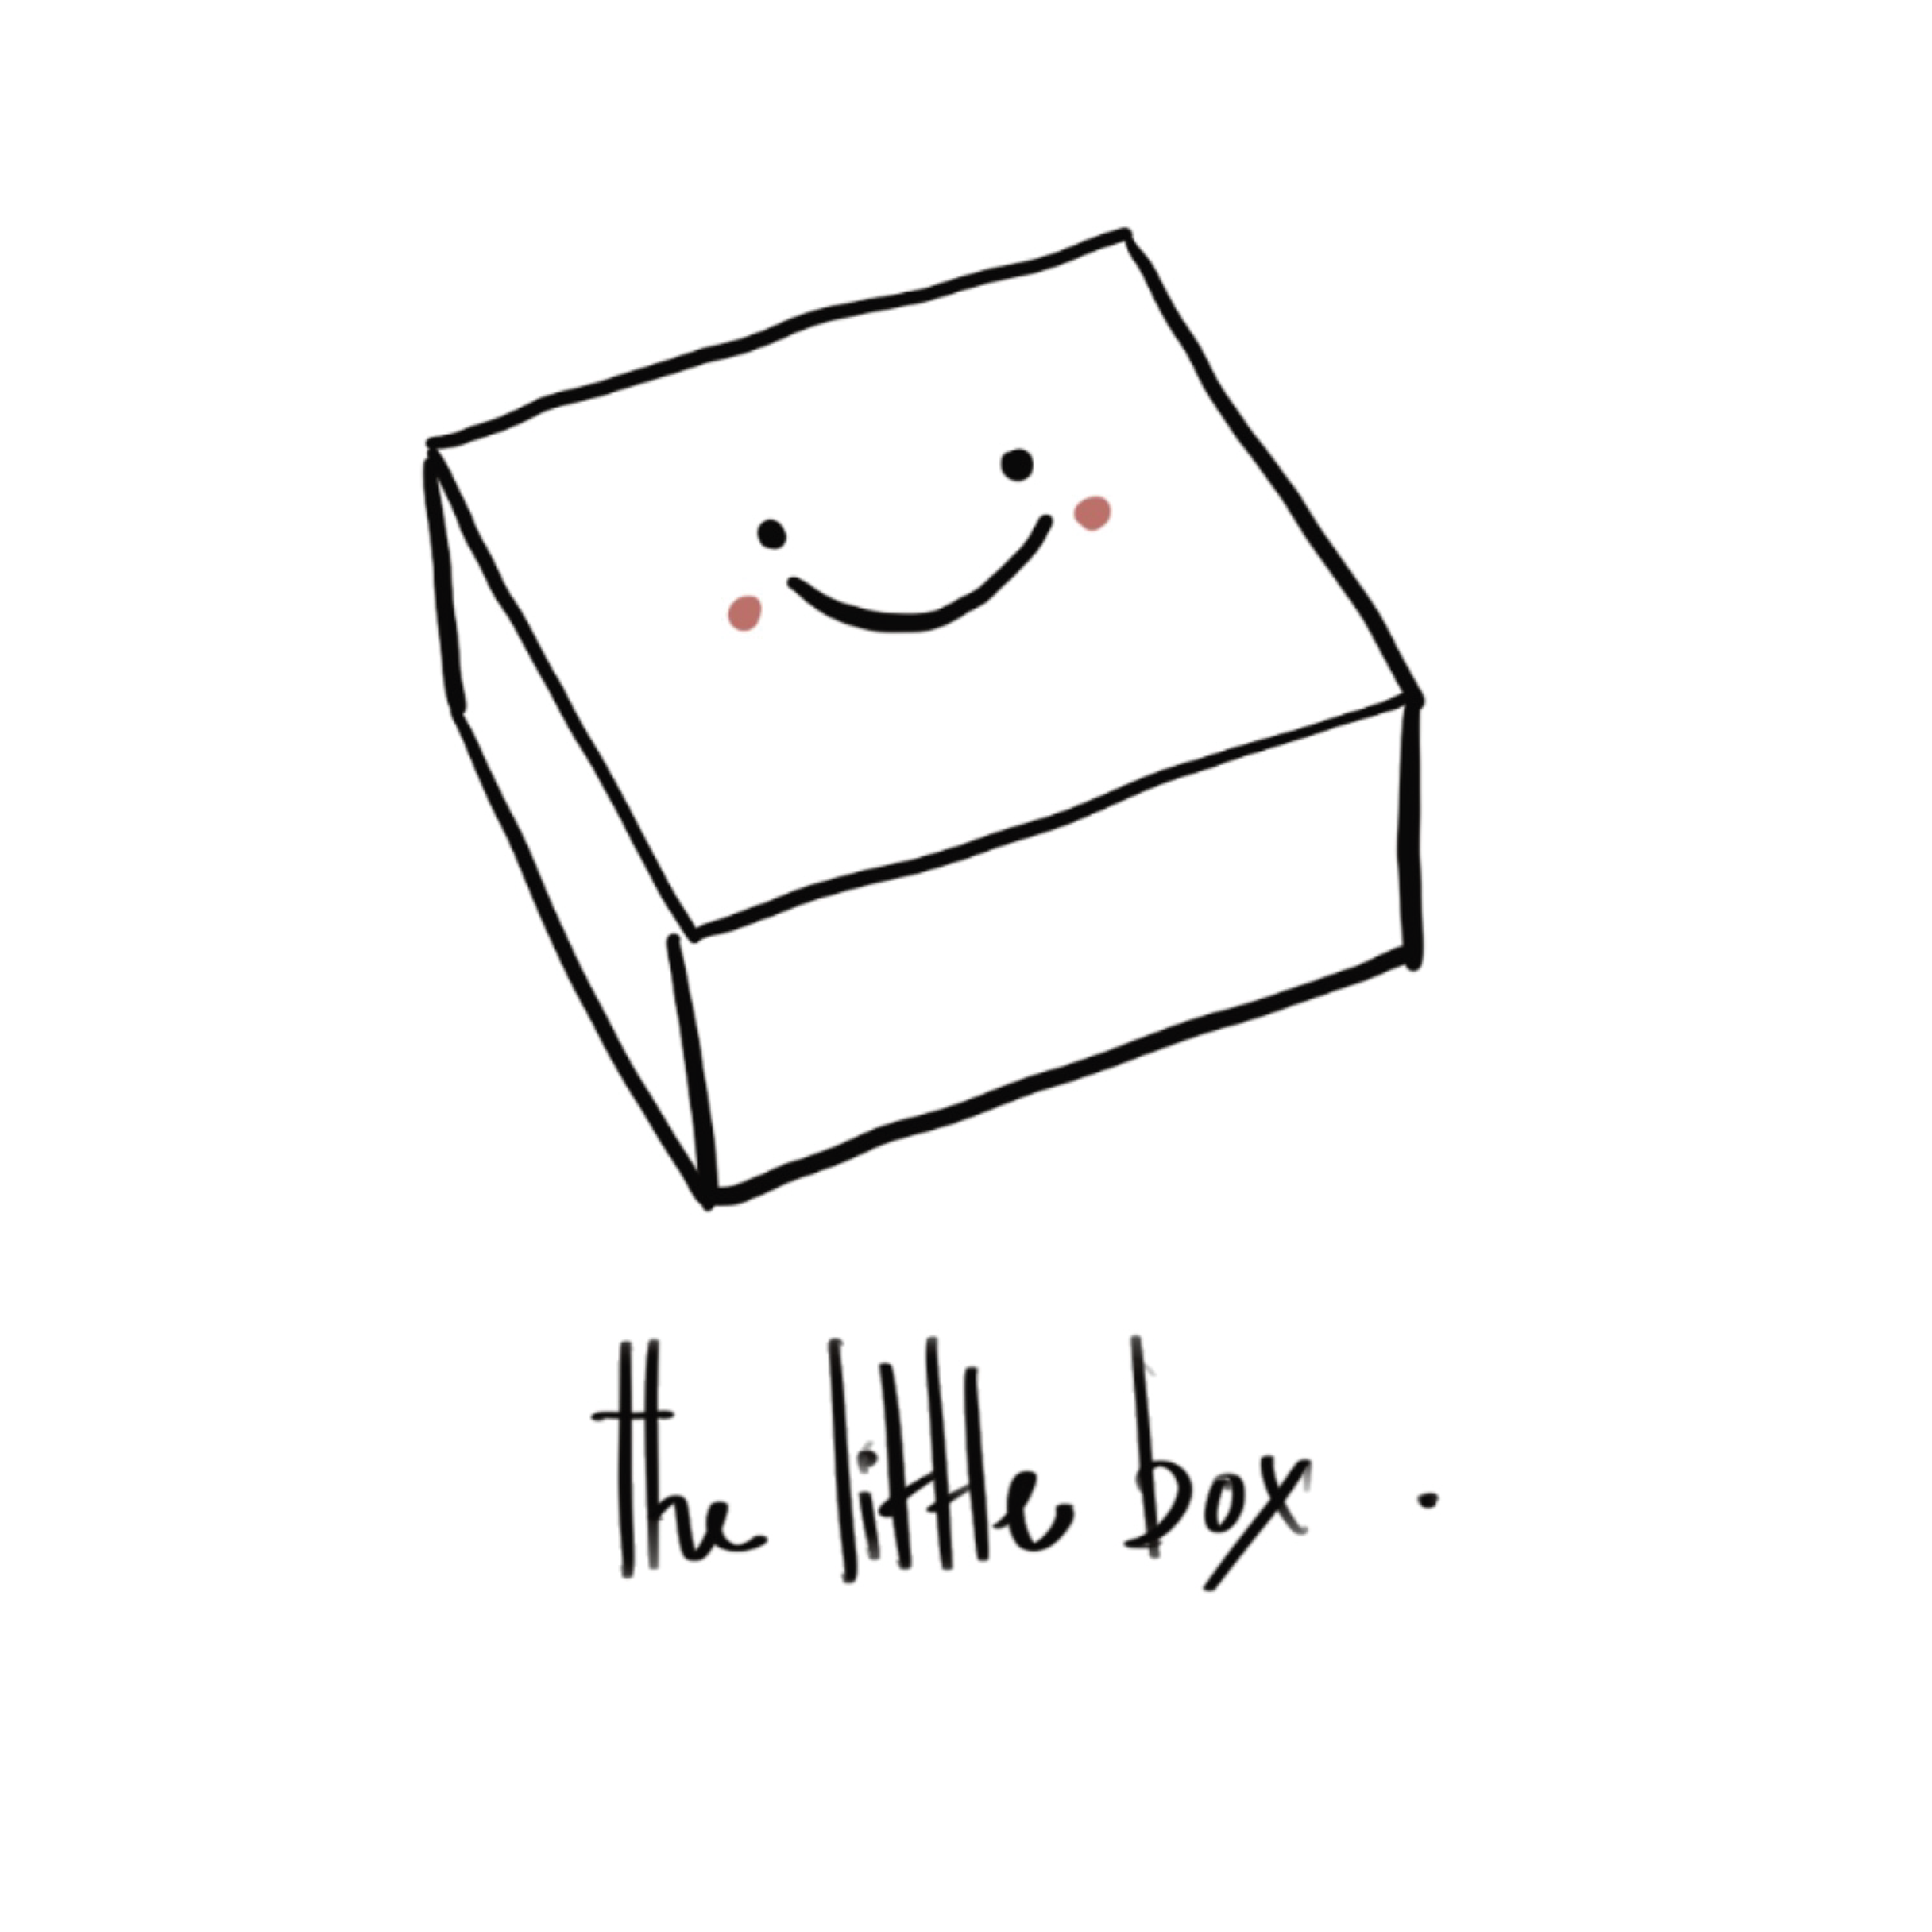 https://my.mncjobz.com/company/the-little-box